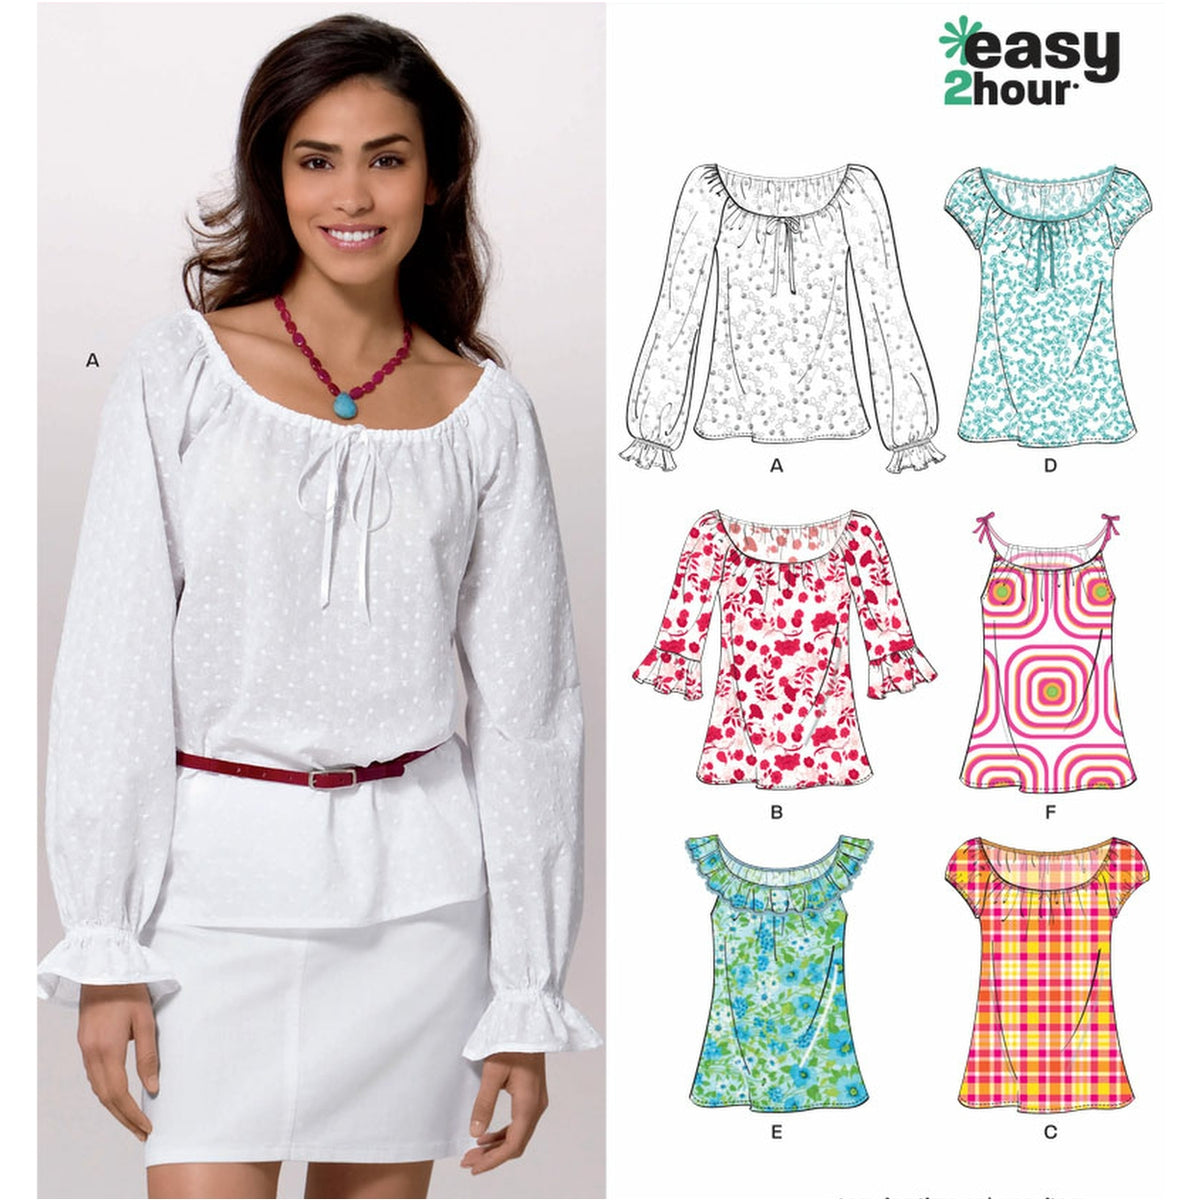 New Look Pattern: NL6892 Misses Top | Easy — jaycotts.co.uk - Sewing ...